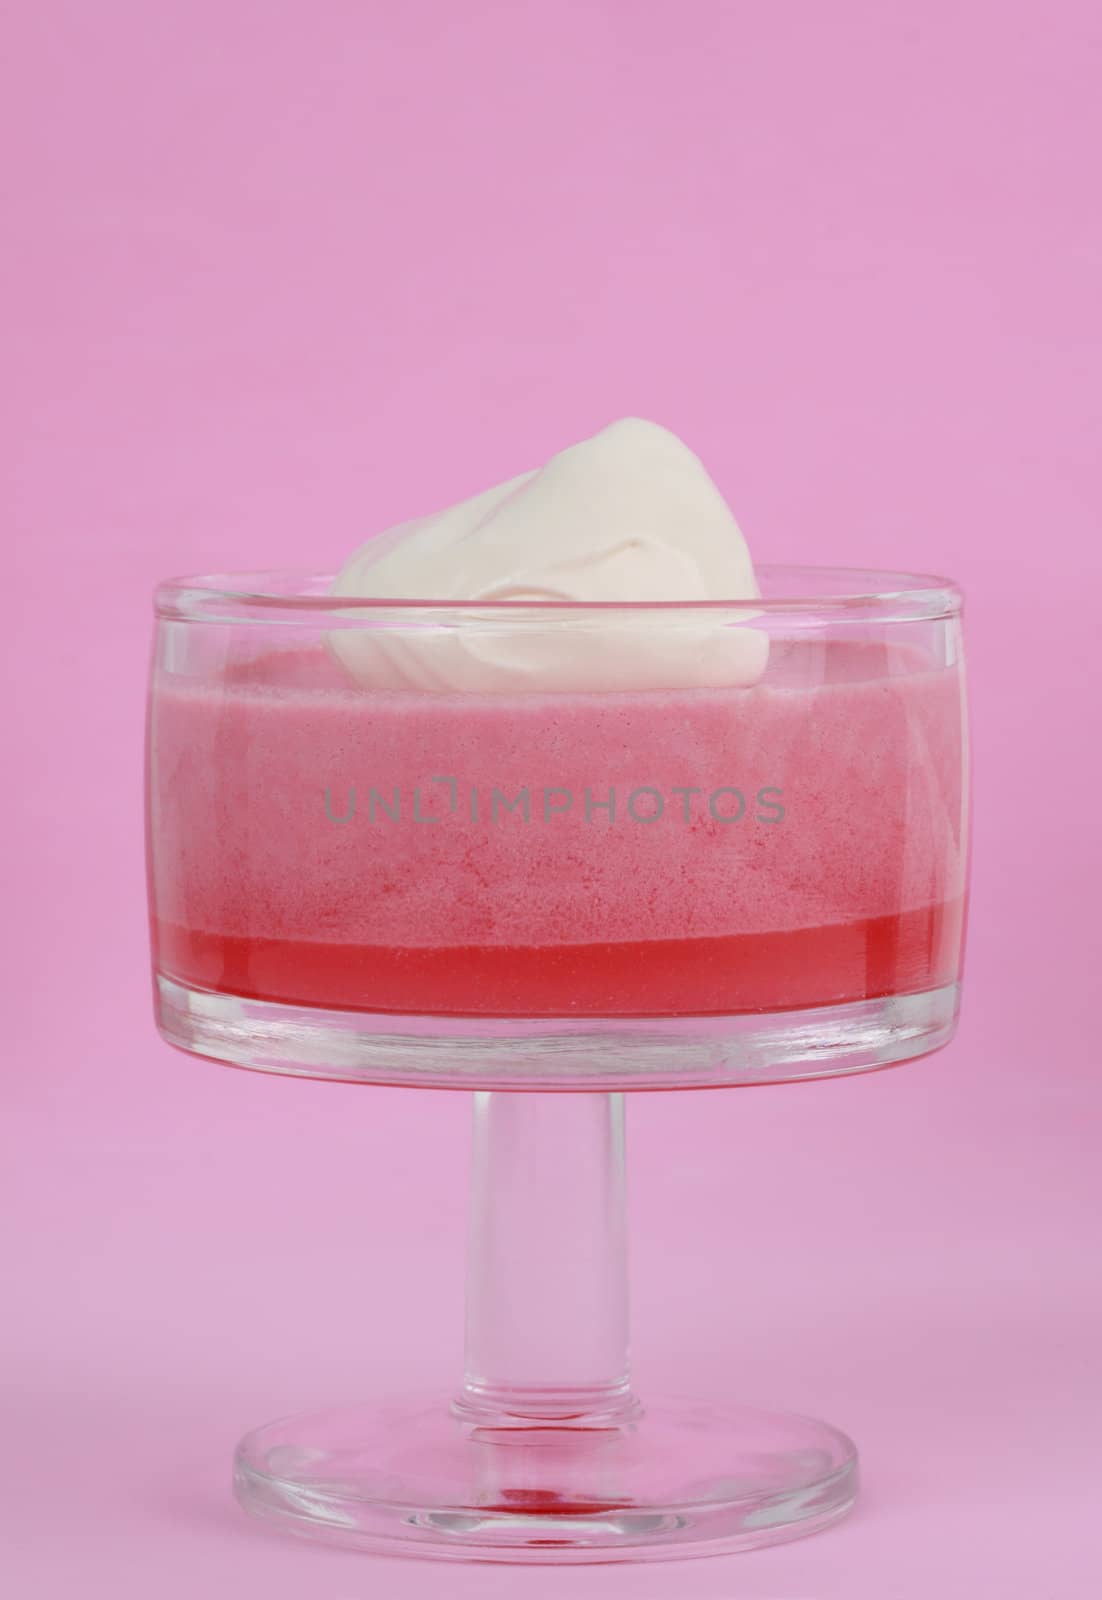 pink jelly and mousse dessert by lanalanglois